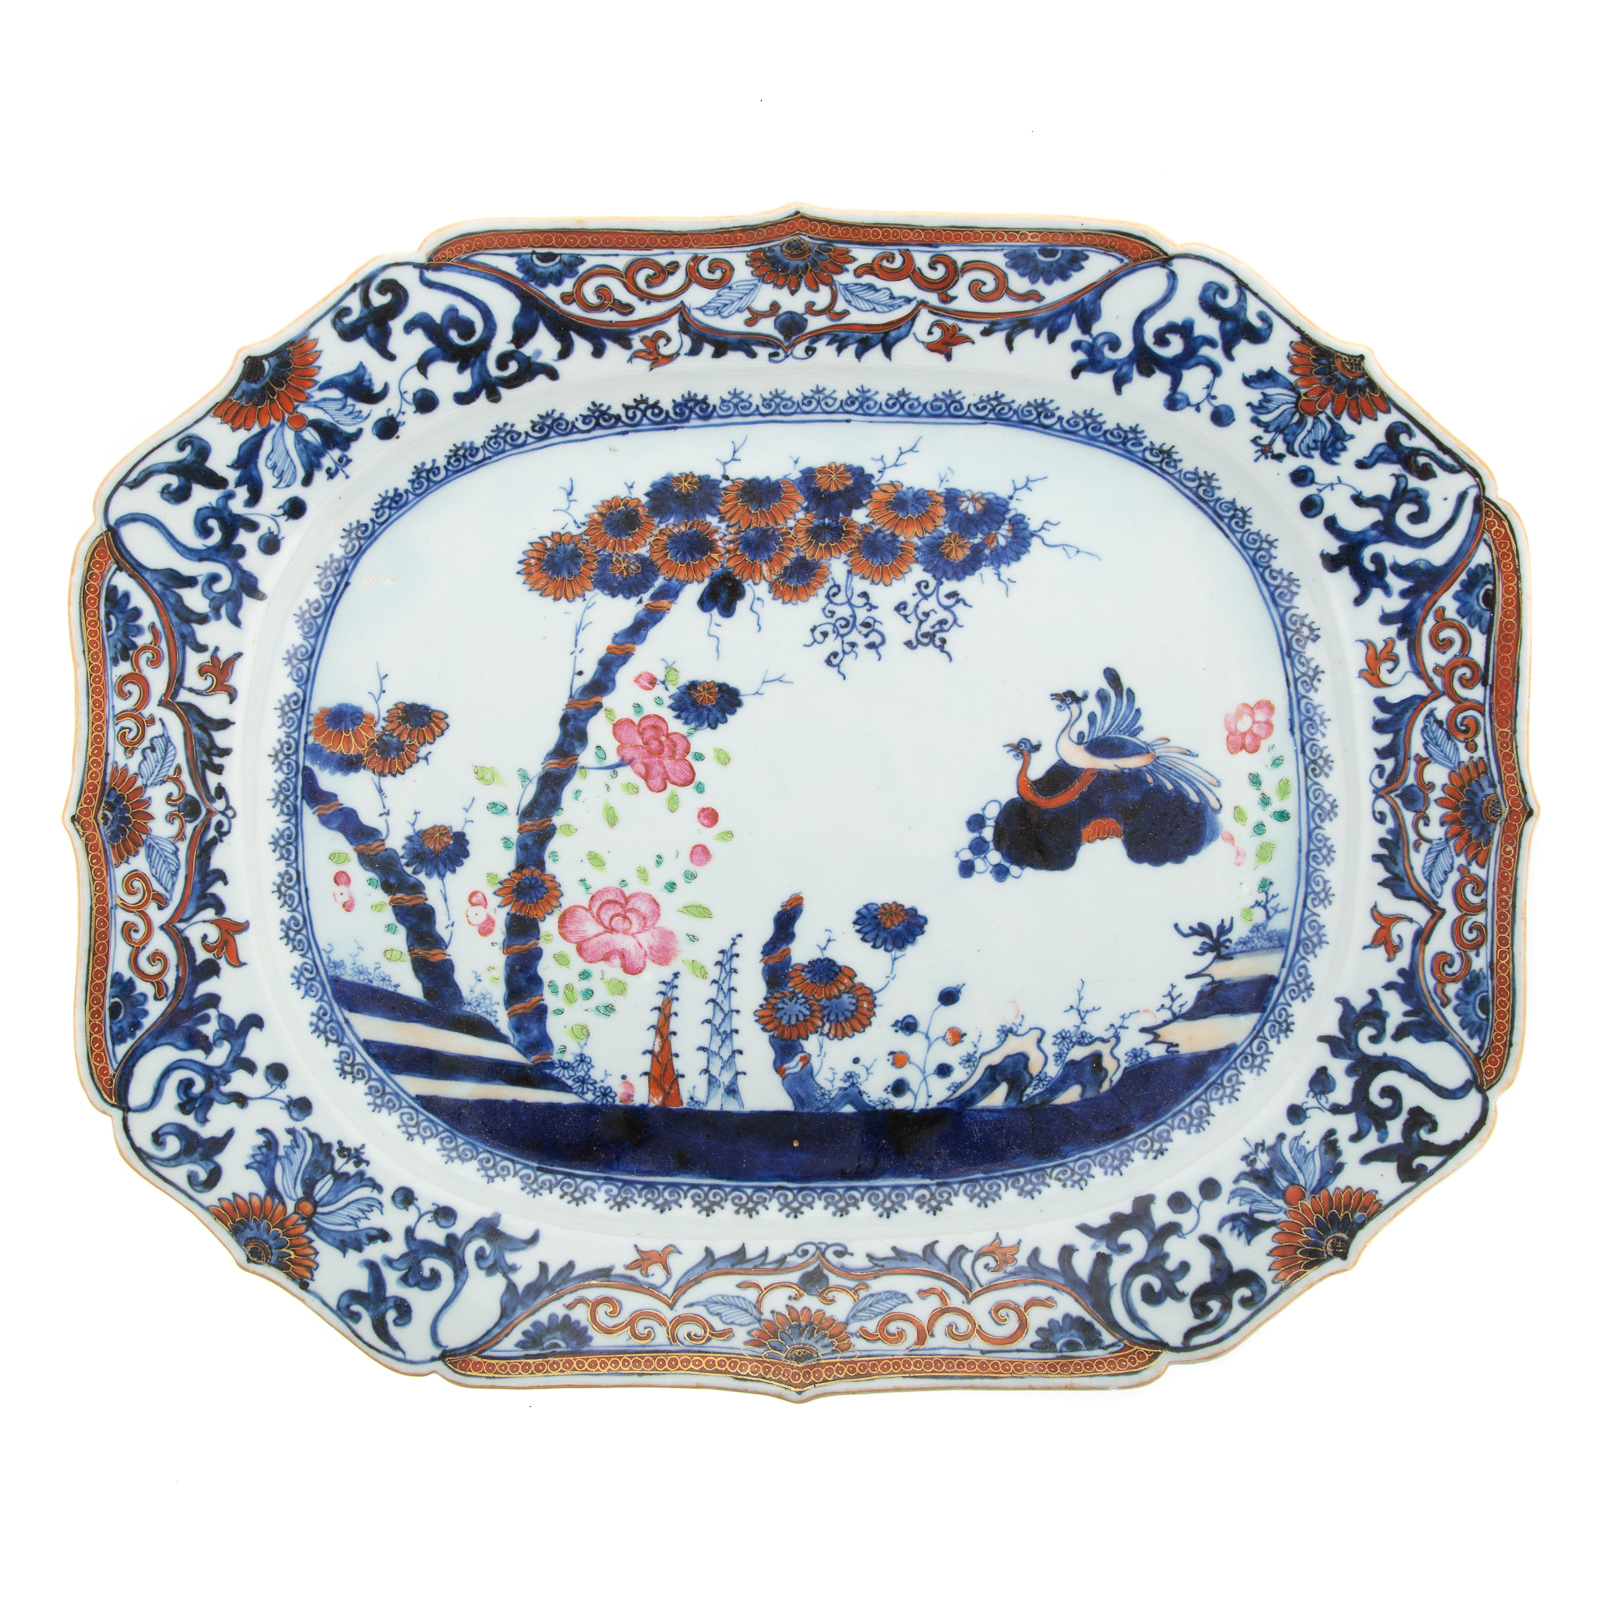 CHINESE EXPORT PLATTER WITH CARROLL 29e6a9